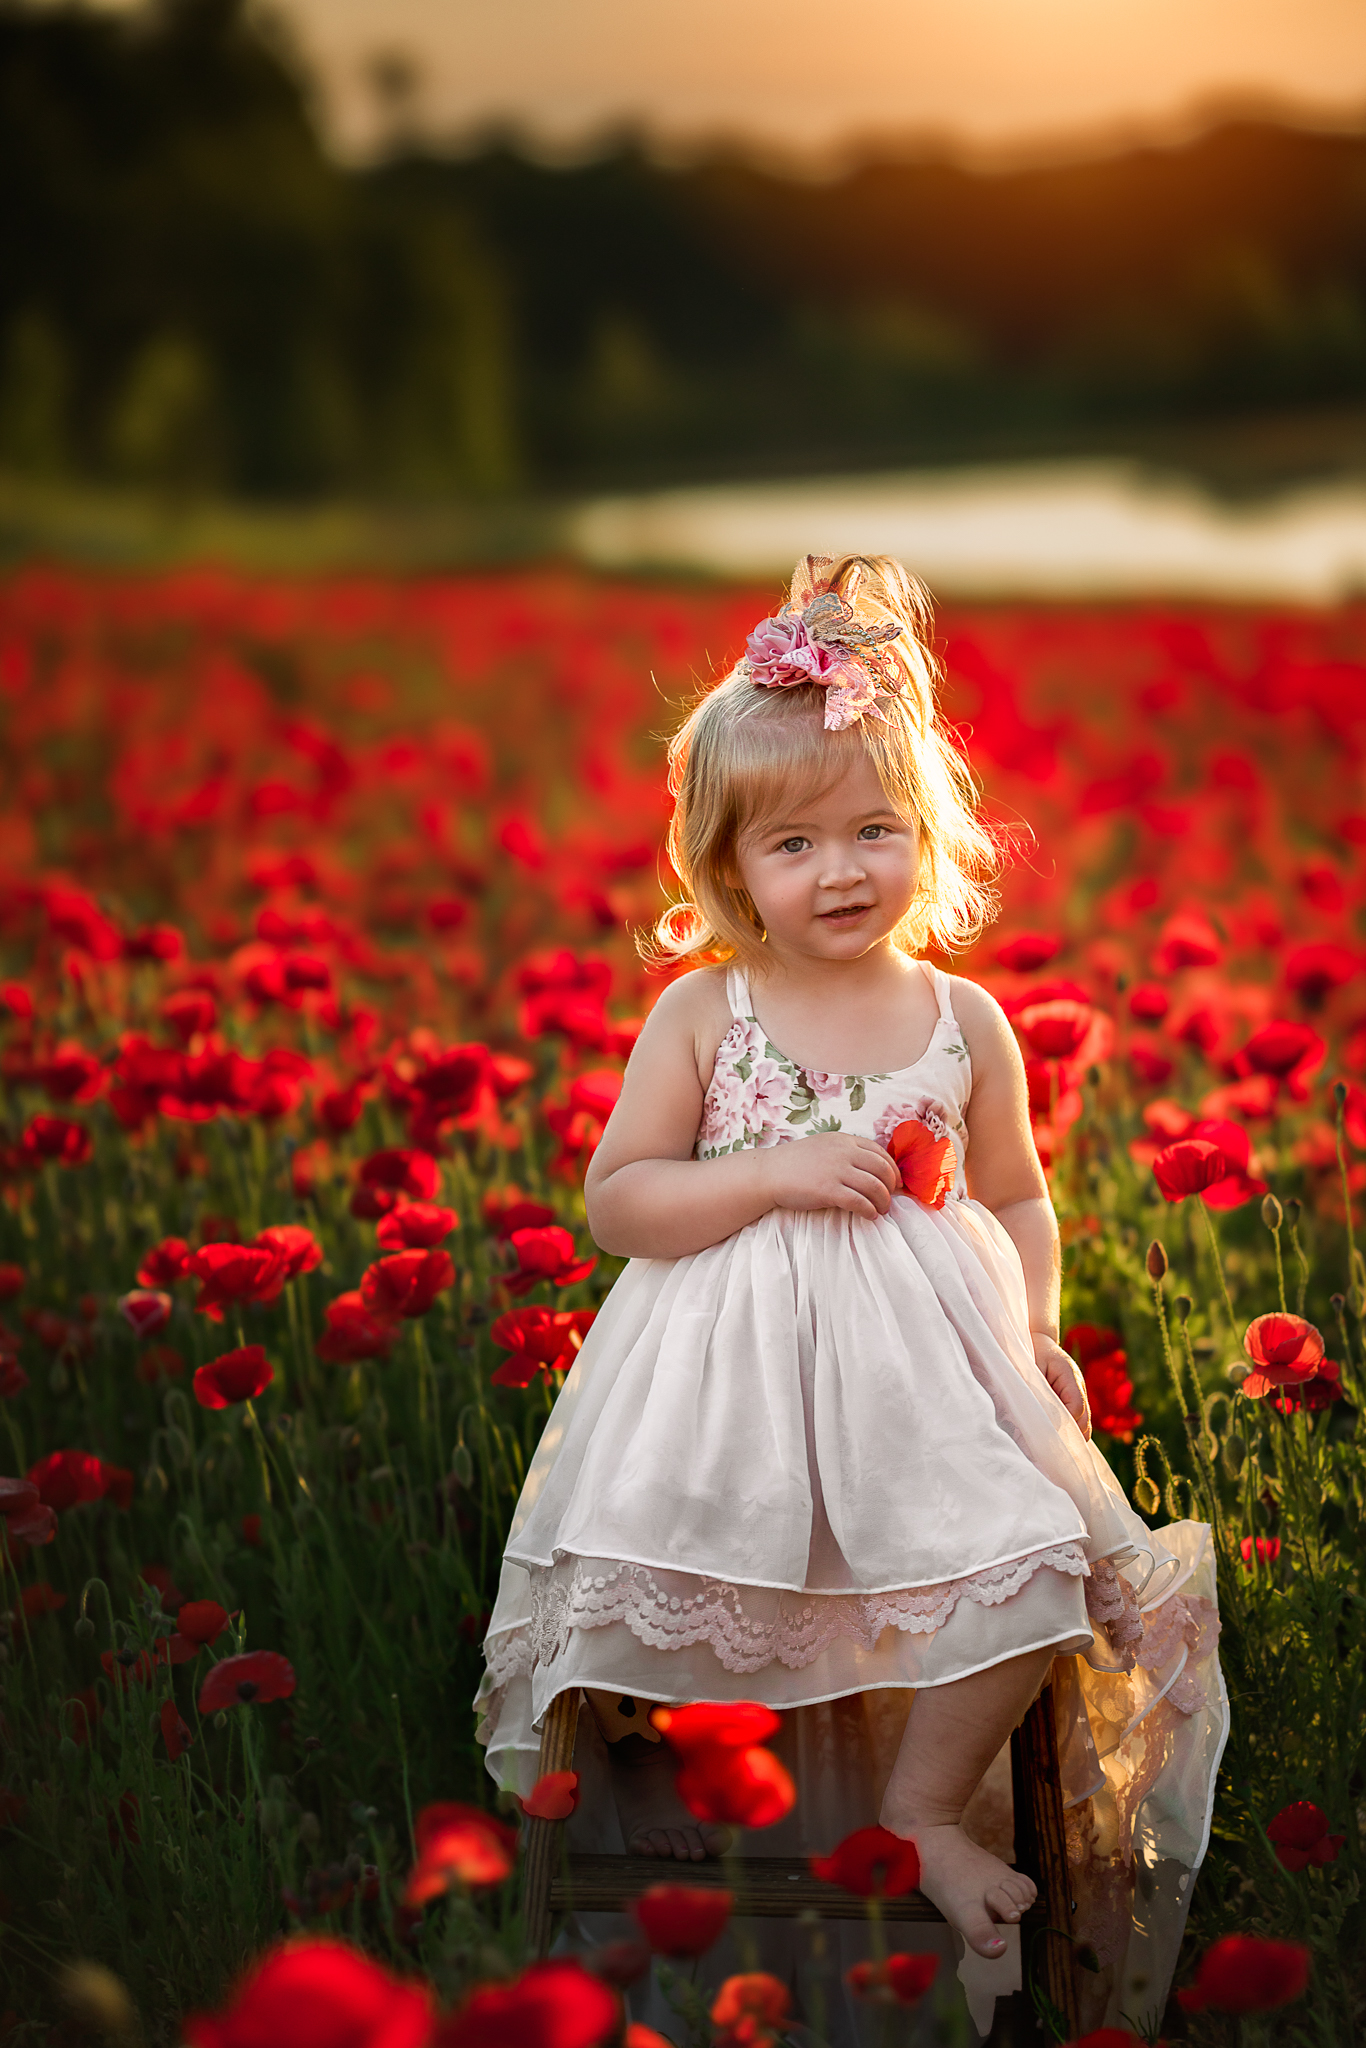 young girl sitting in a field of red poppies